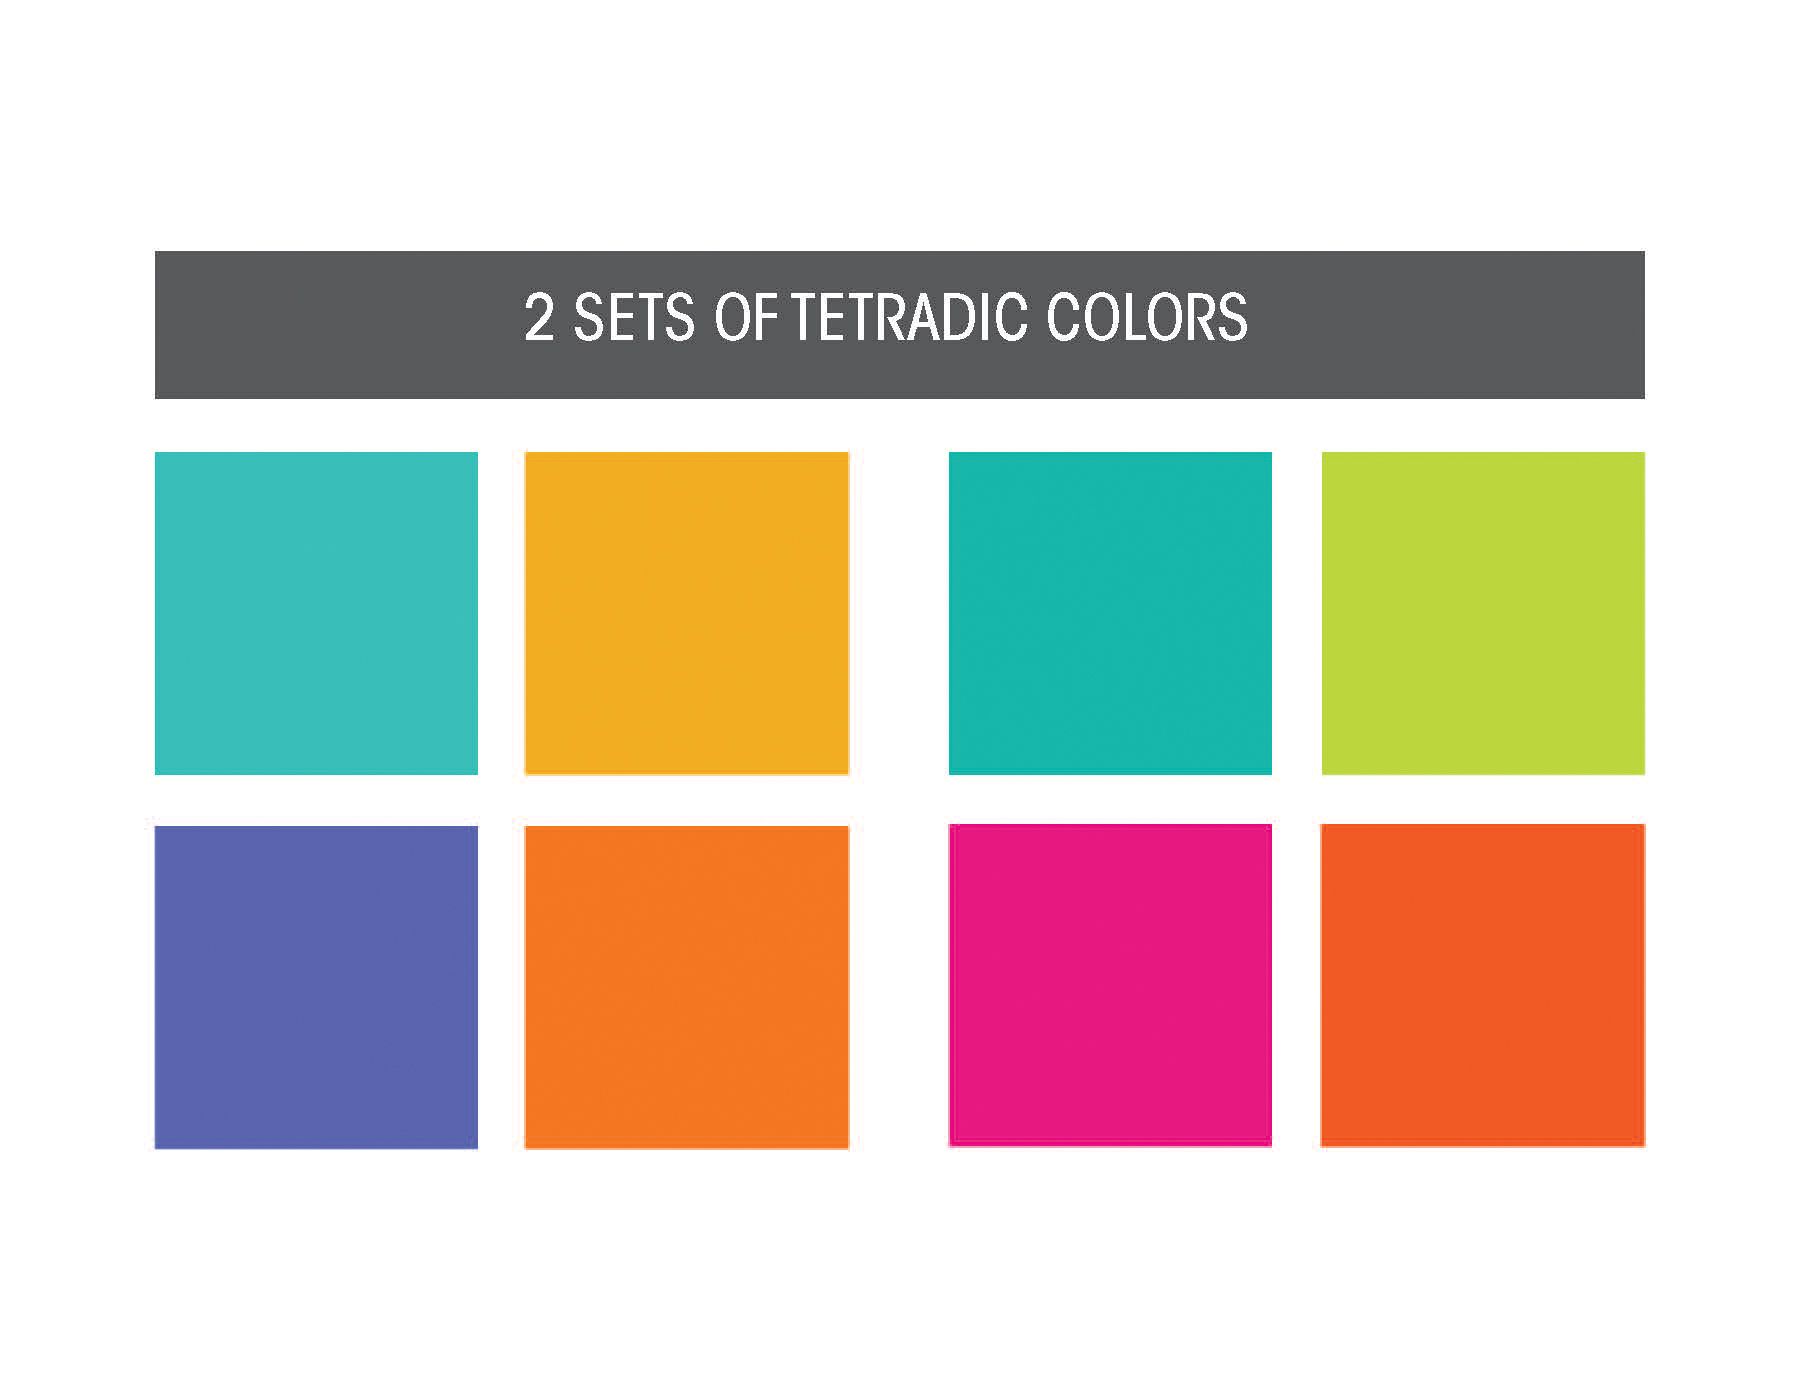 Tetradic colors-combinations of 4 colors that form a rectangle or ...